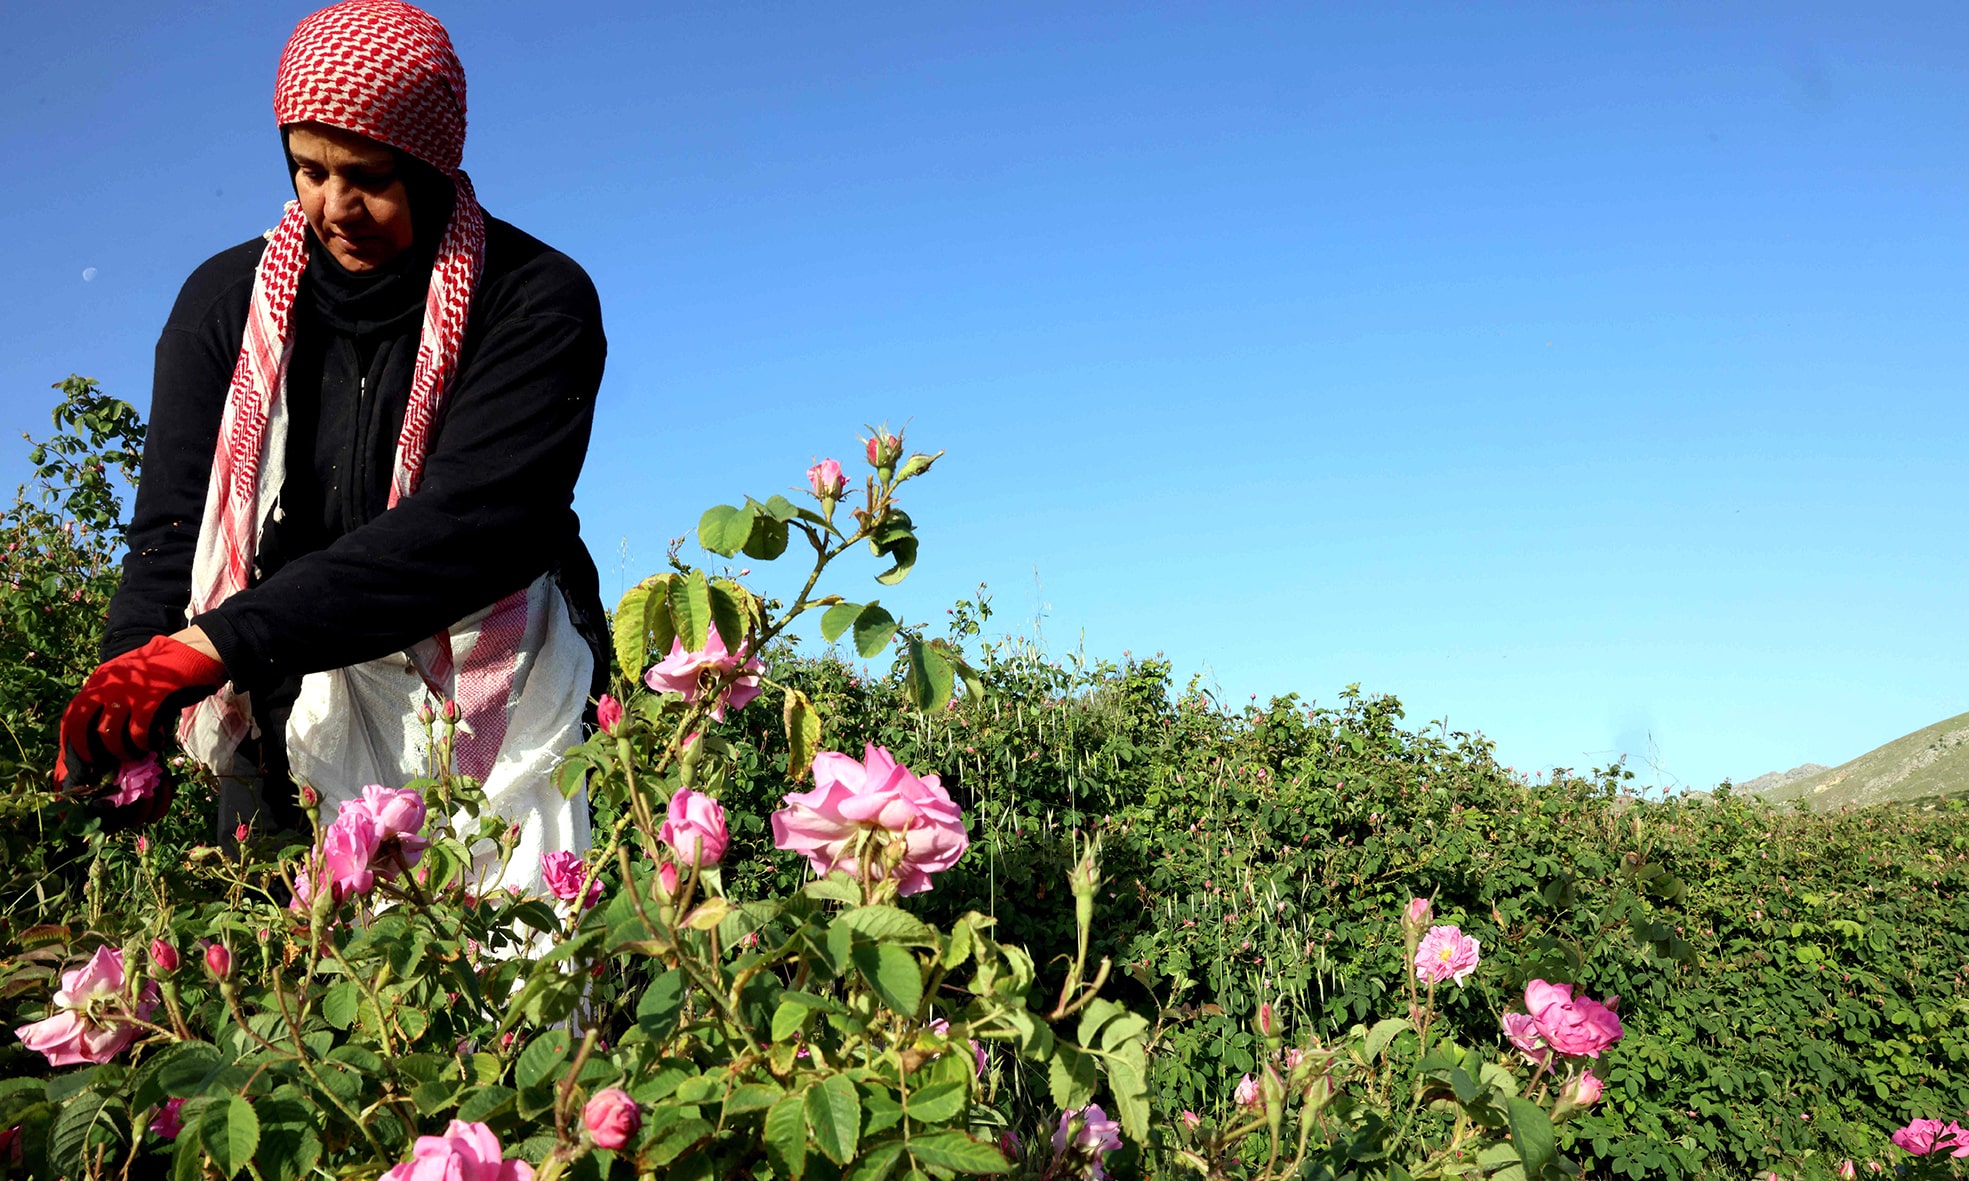 A Lebanese villager harvests Damask roses at an agricultural field in the village of Ksarnaba, in the Bekaa valley.